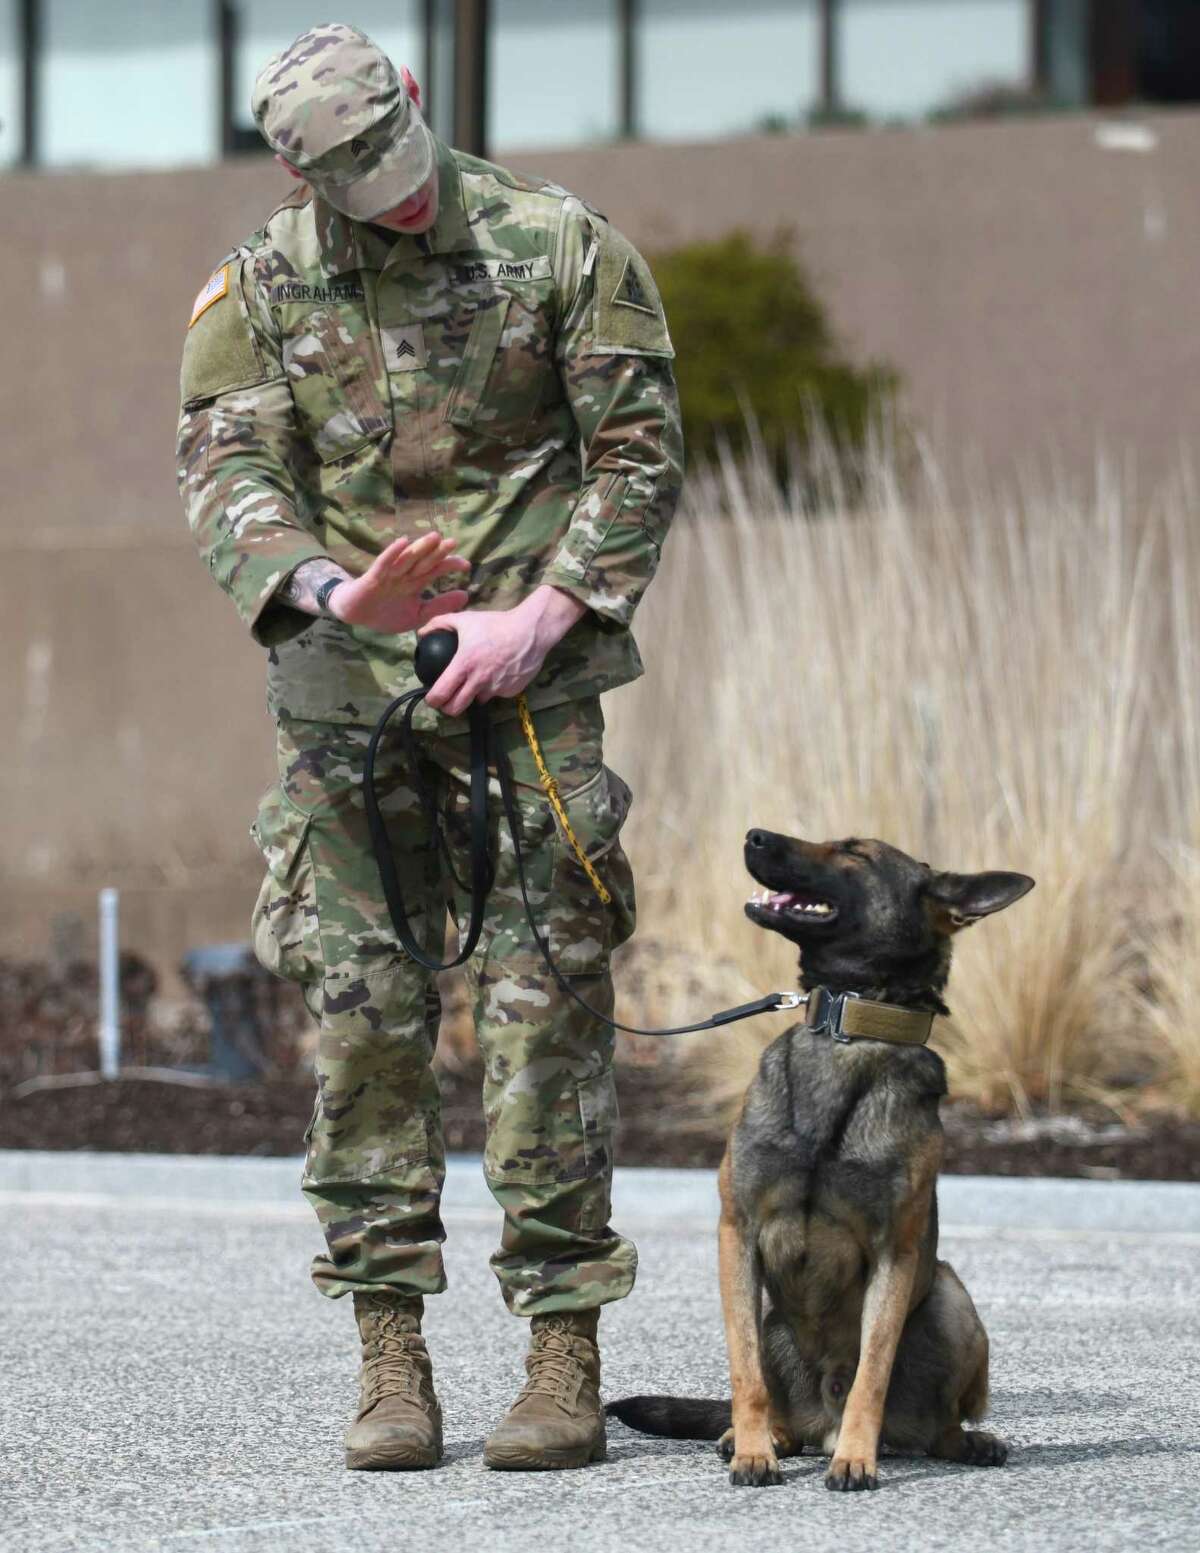 Military Working Dog Dino obeys commands from his handler U.S. Army National Guard Sgt. Colin Ingraham at the National K-9 Veterans Day event at Veterans Memorial Park in Stamford, Conn. Sunday, March 13, 2022. Presented by the Stamford Veterans Park Partnership, military and police dogs were honored and gave demonstrations of attacking, detecting missing persons, and detecting firearms and explosives.